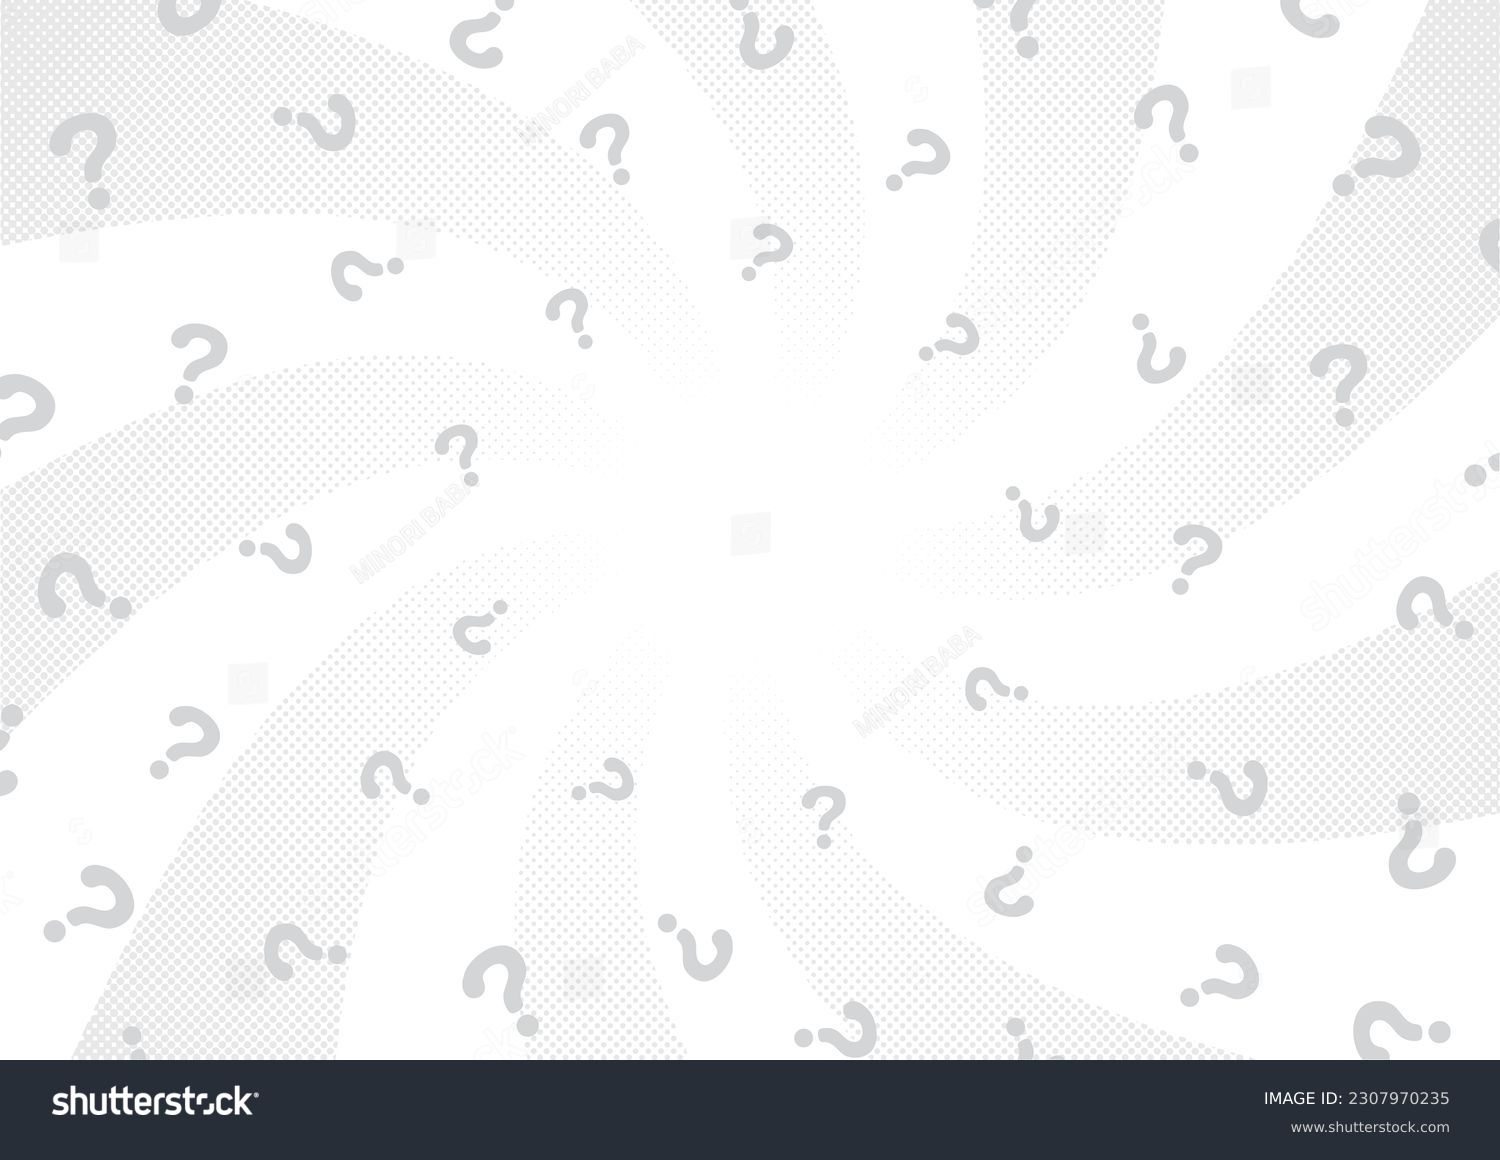 Question mark background, illustration of question or curiosity image #2307970235